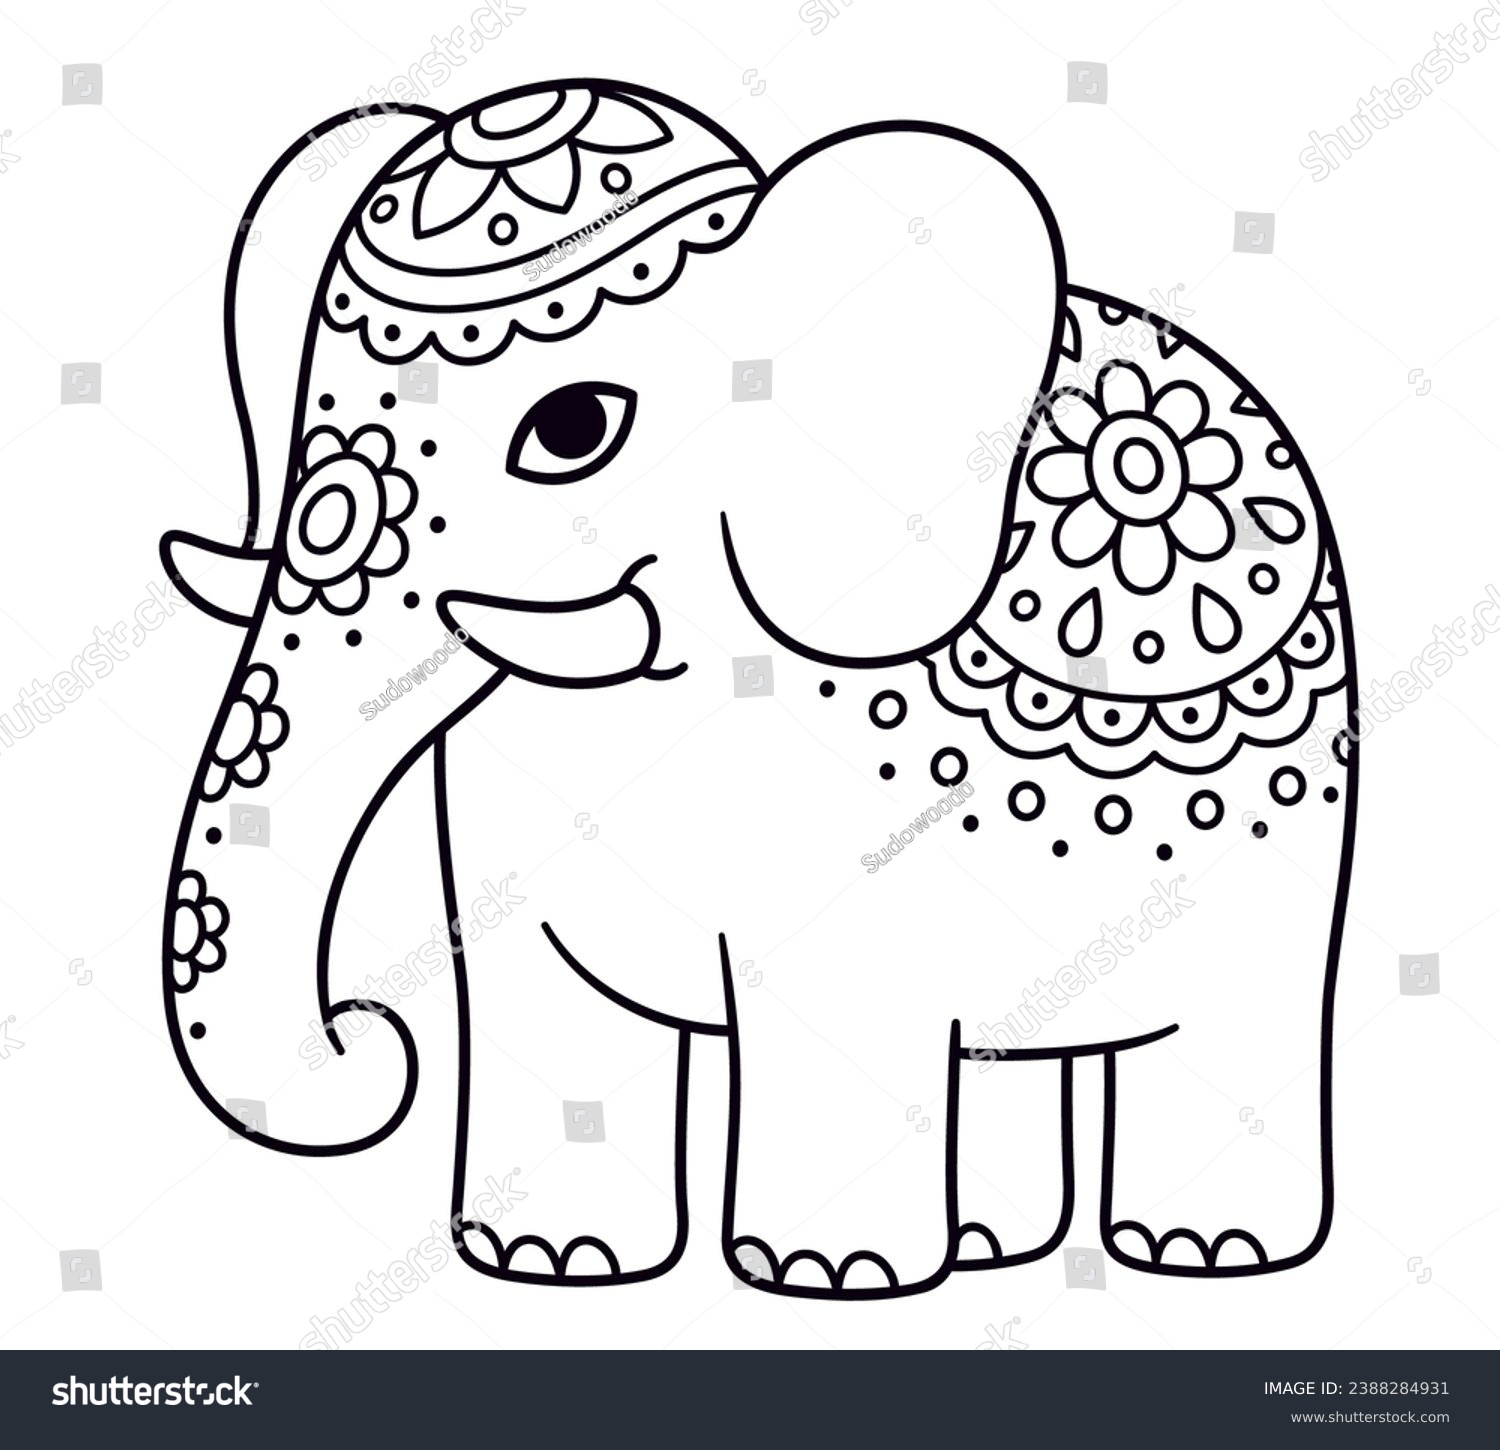 SVG of Cute cartoon decorated elephant doodle. Indian elephant with painted flowers. Black and white line art for coloring. Vector clip art illustration. svg